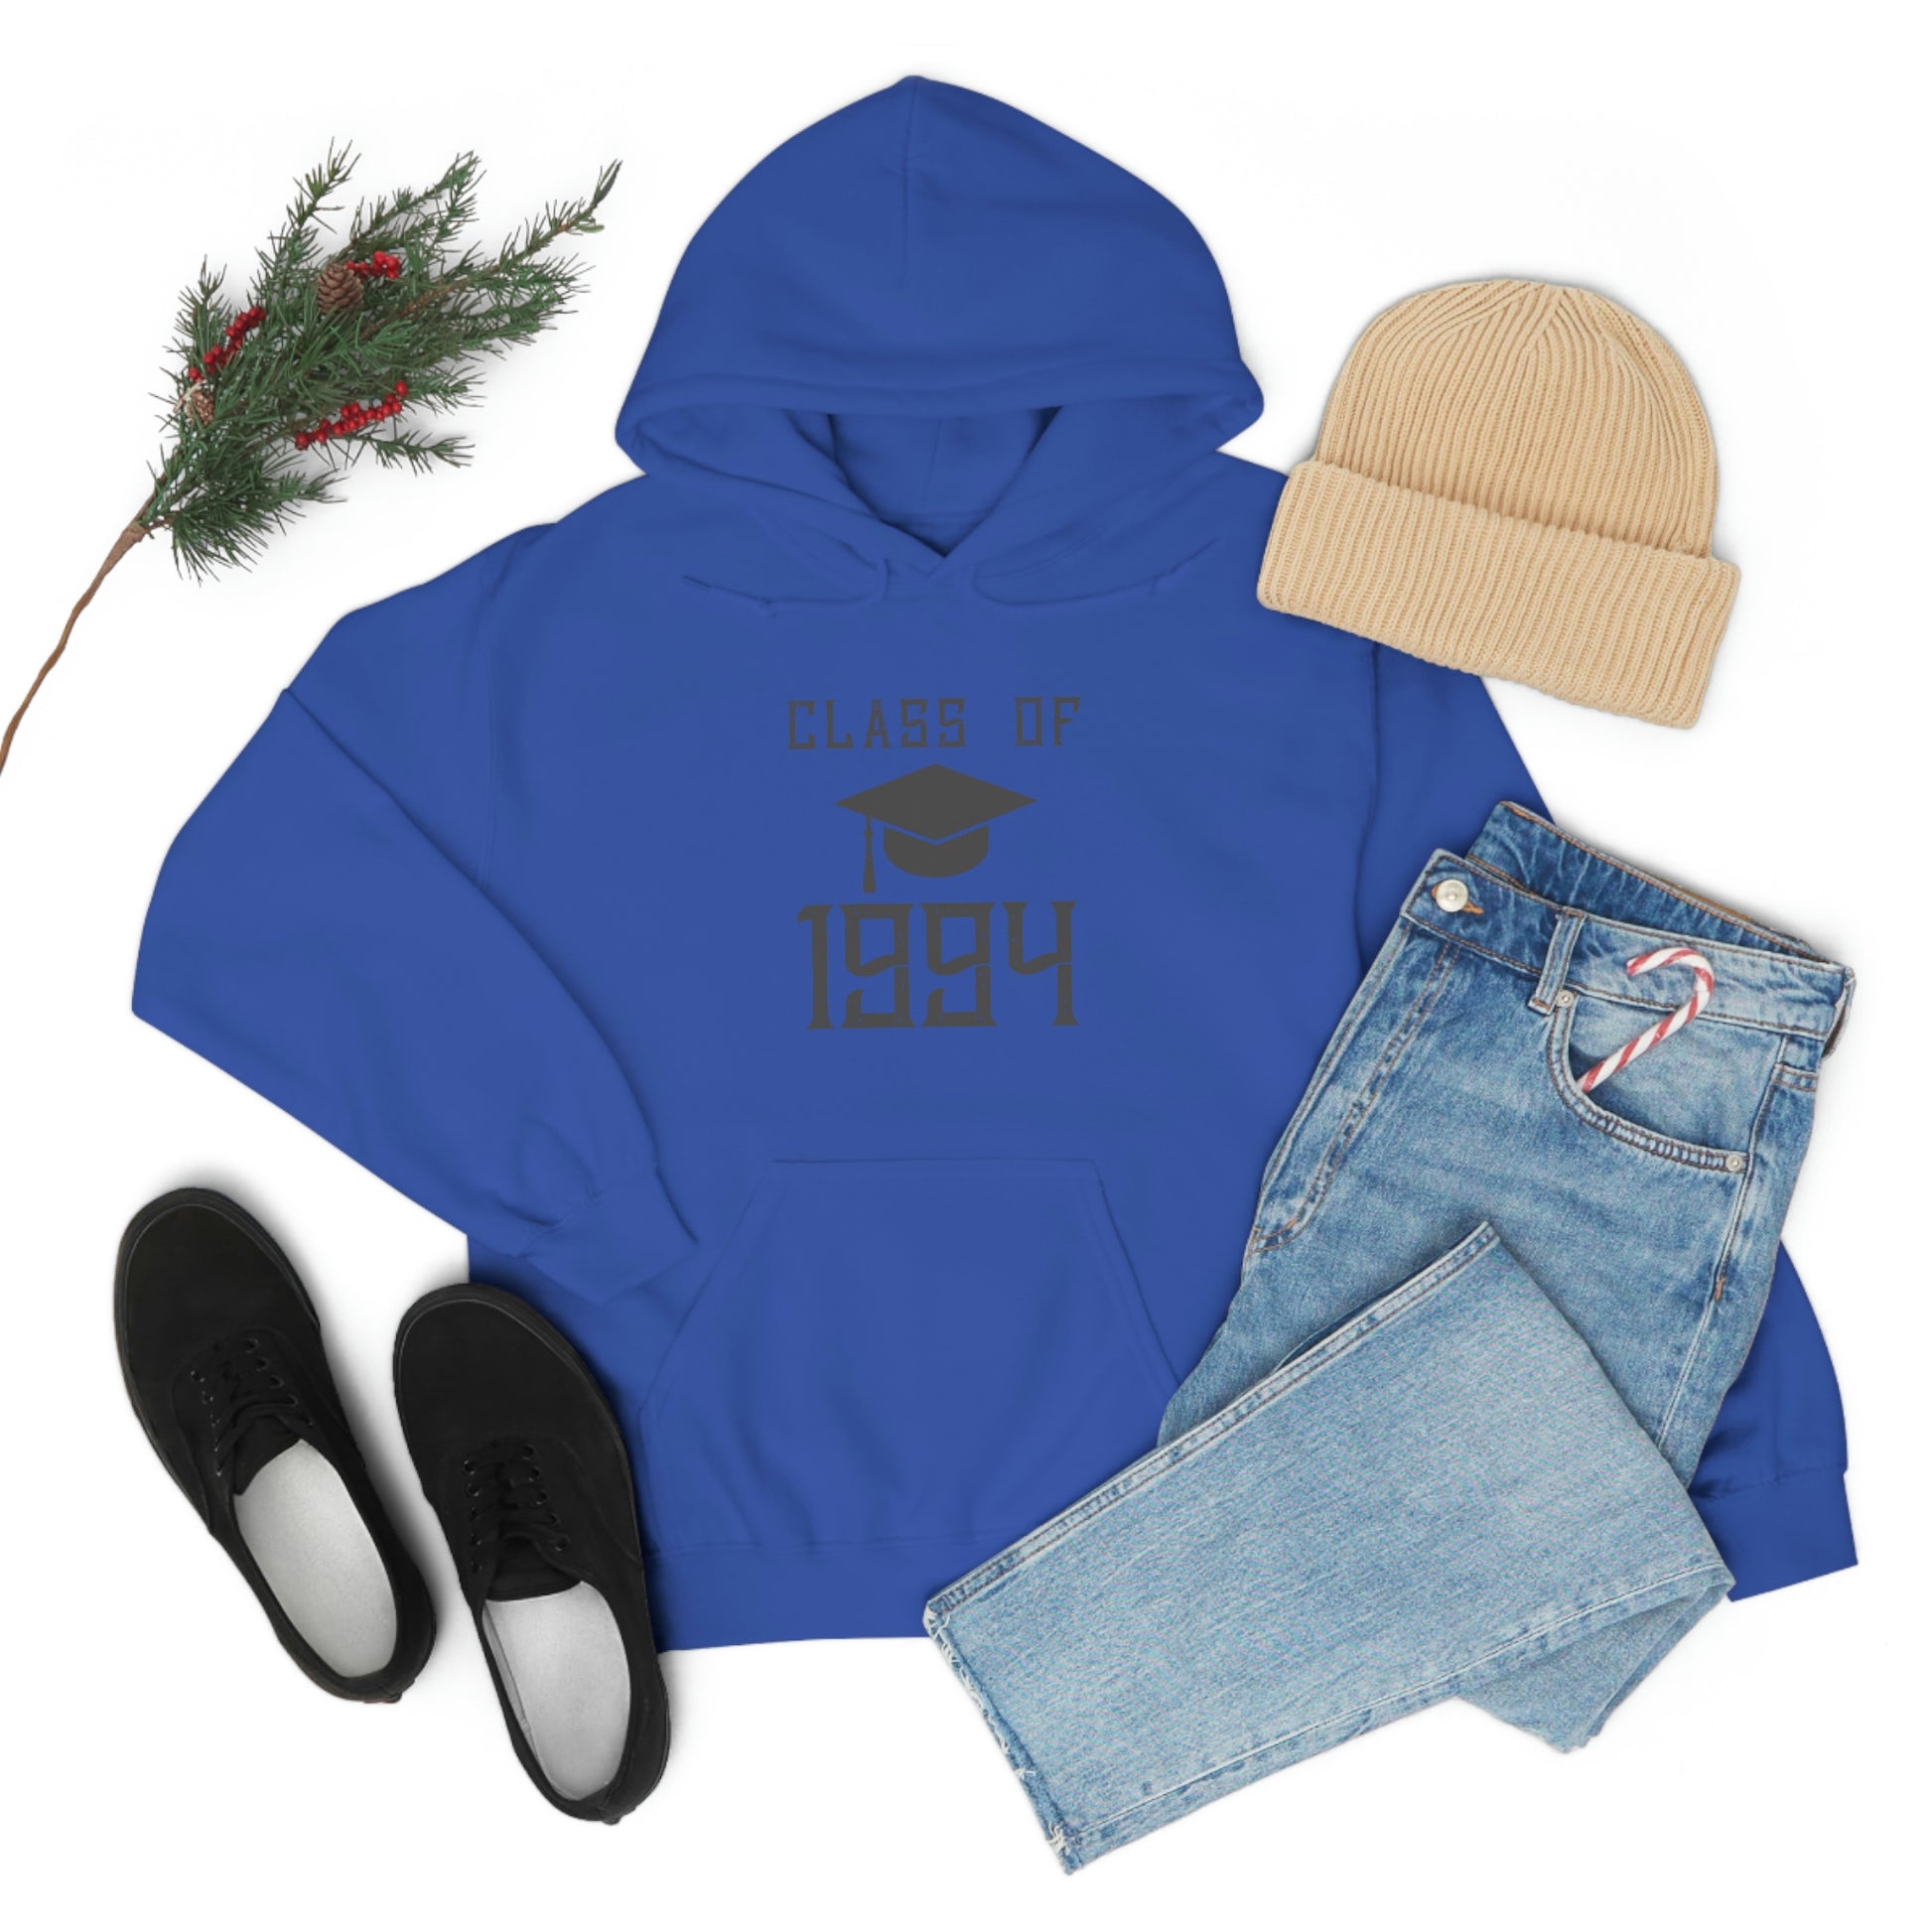 "Class Of 1994" Hoodie - Weave Got Gifts - Unique Gifts You Won’t Find Anywhere Else!